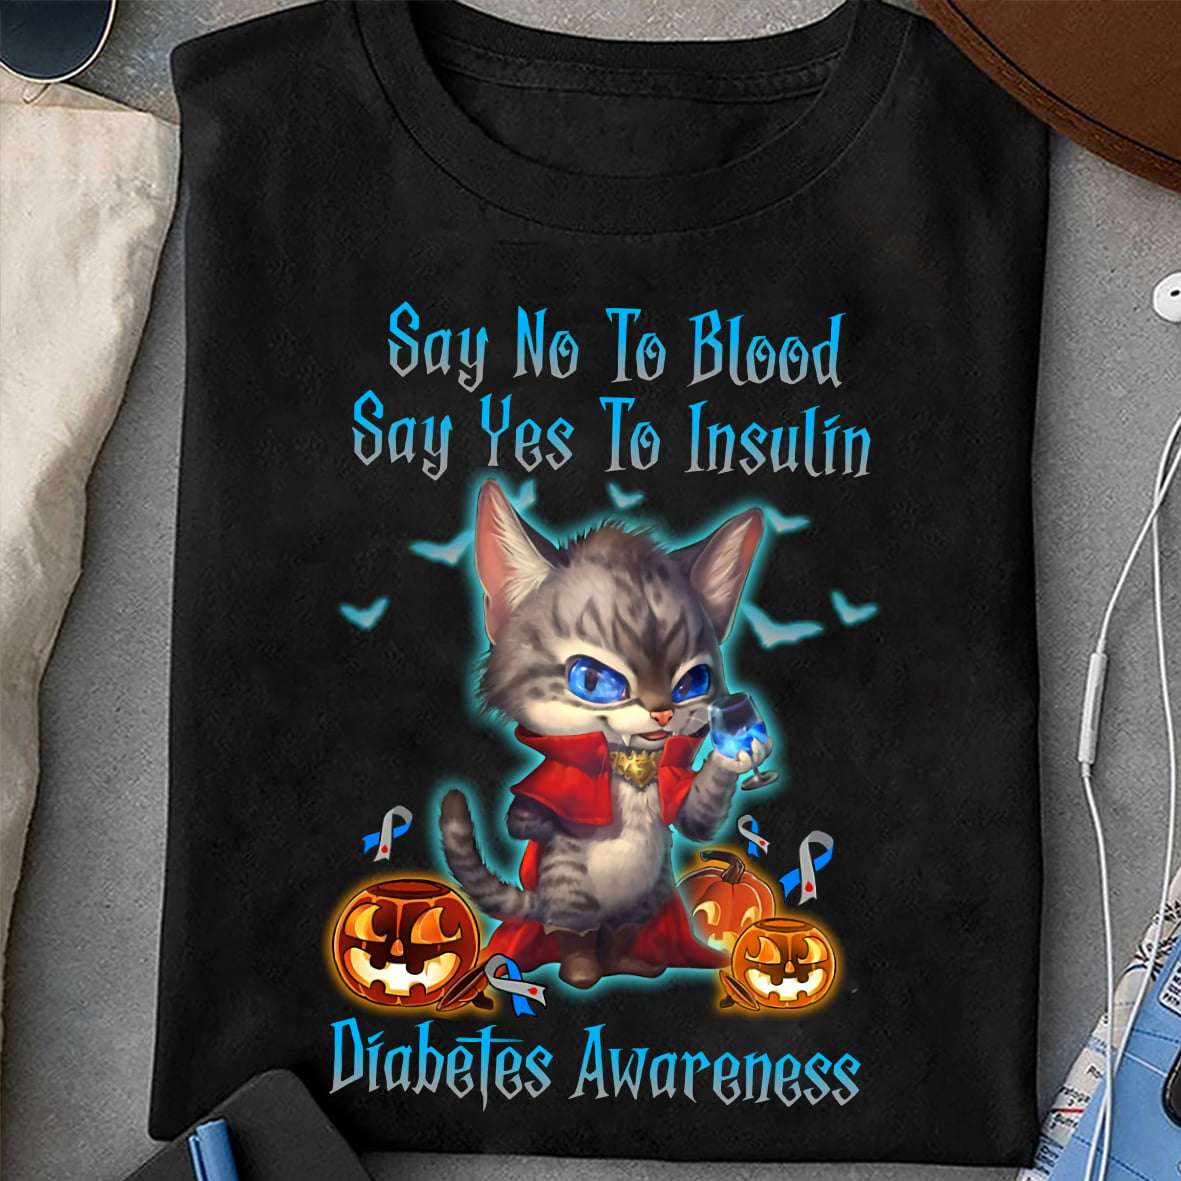 Say no to blood, say yes to insulin - Diabetes awareness, Halloween cat and pumpkin